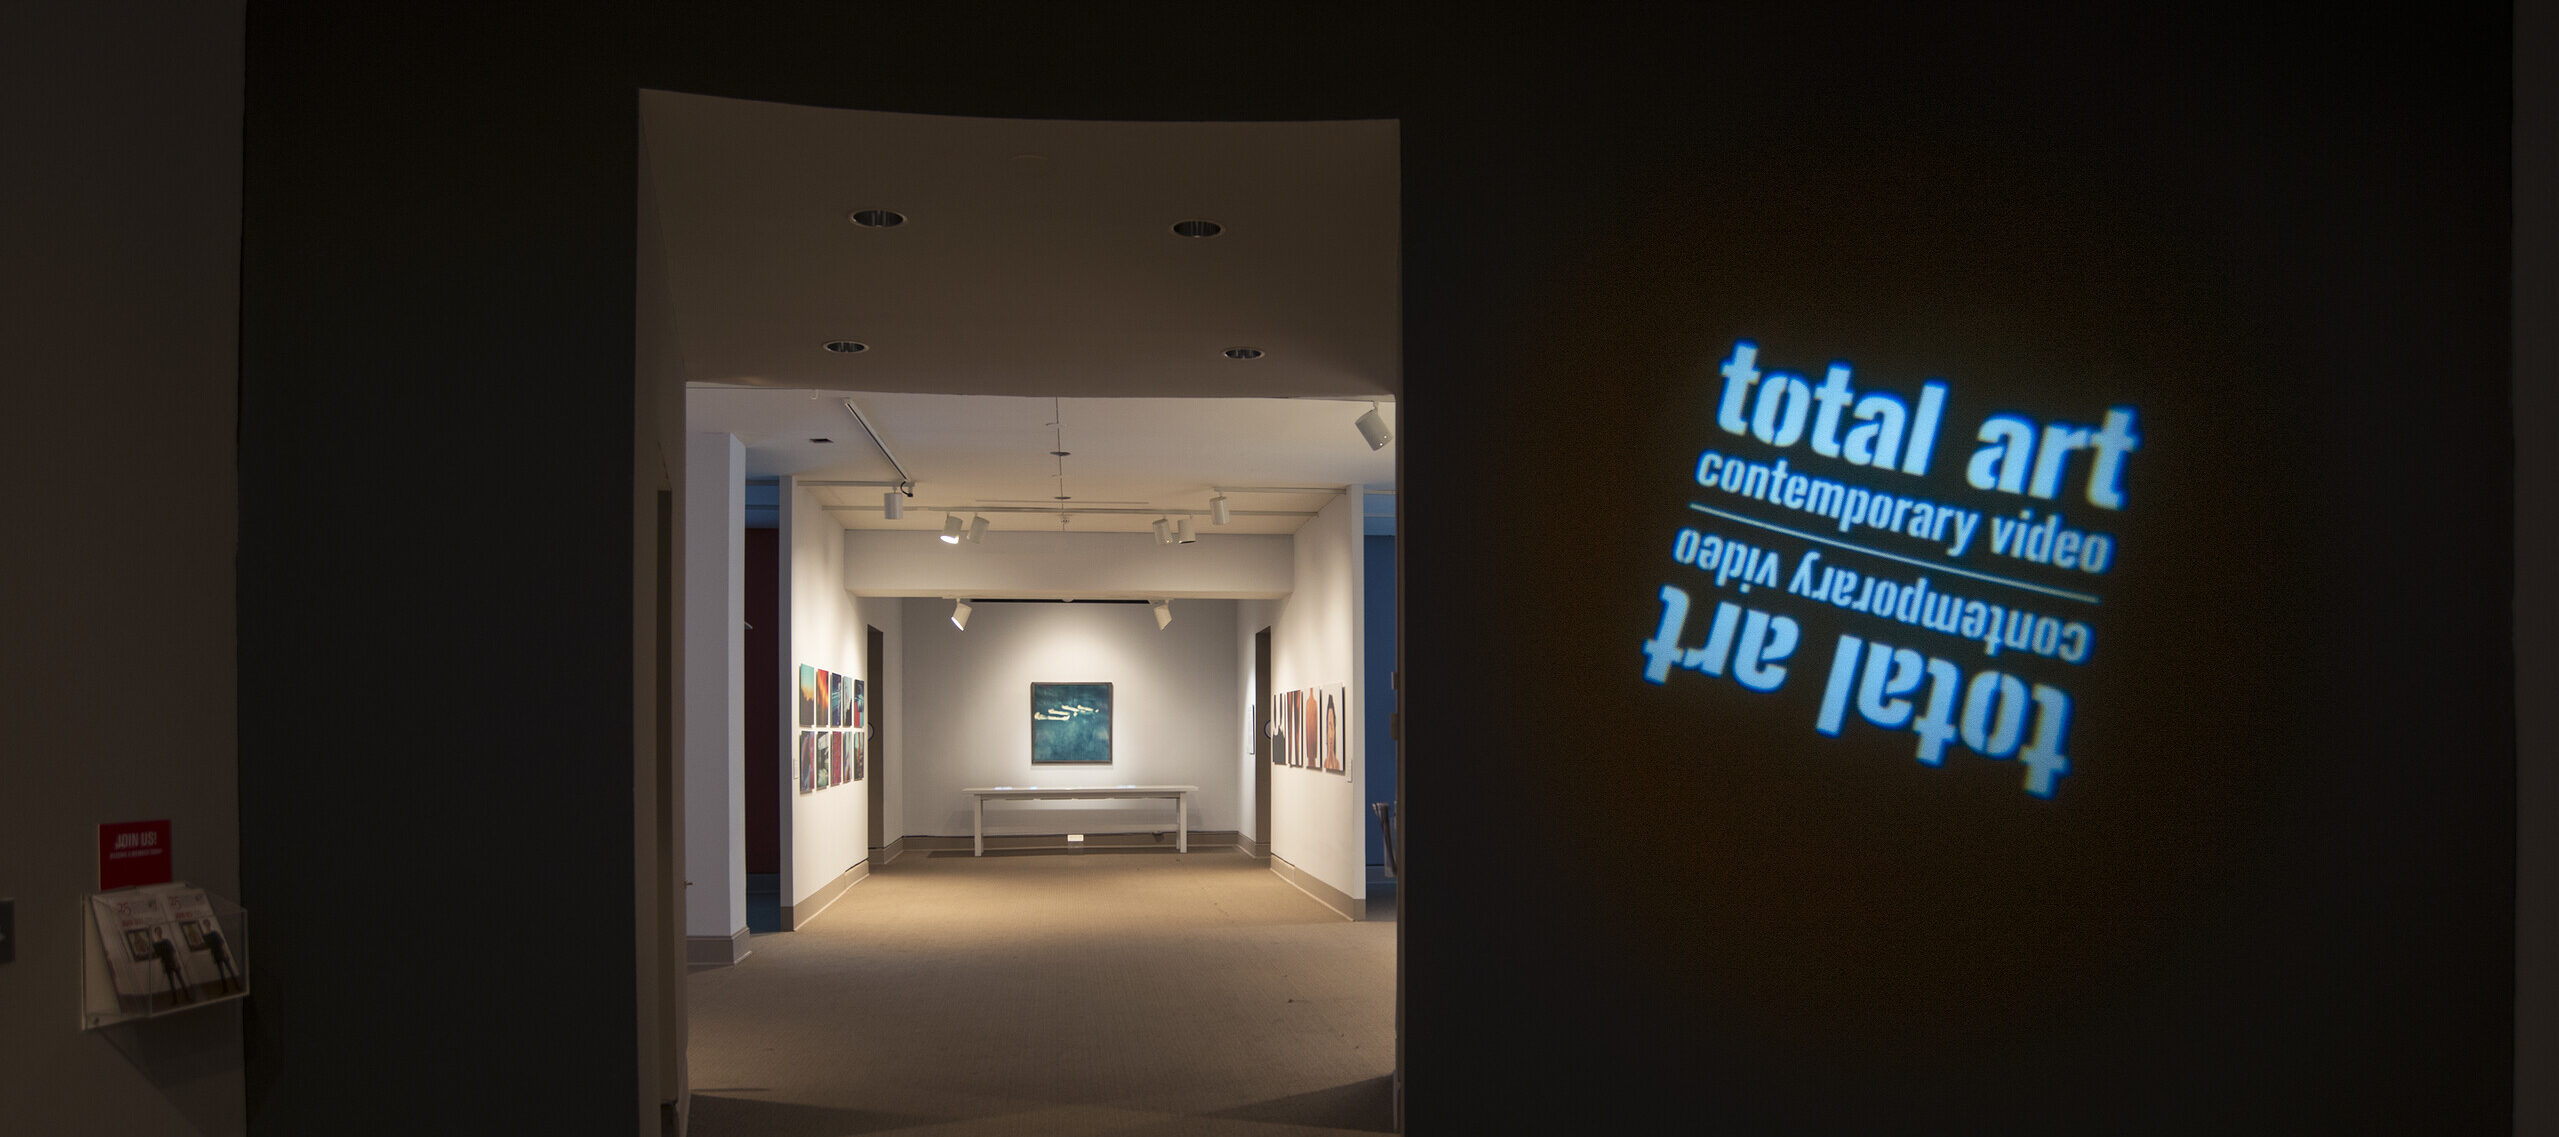 View of a gallery space. In a dark room, the title of the exhibition, 